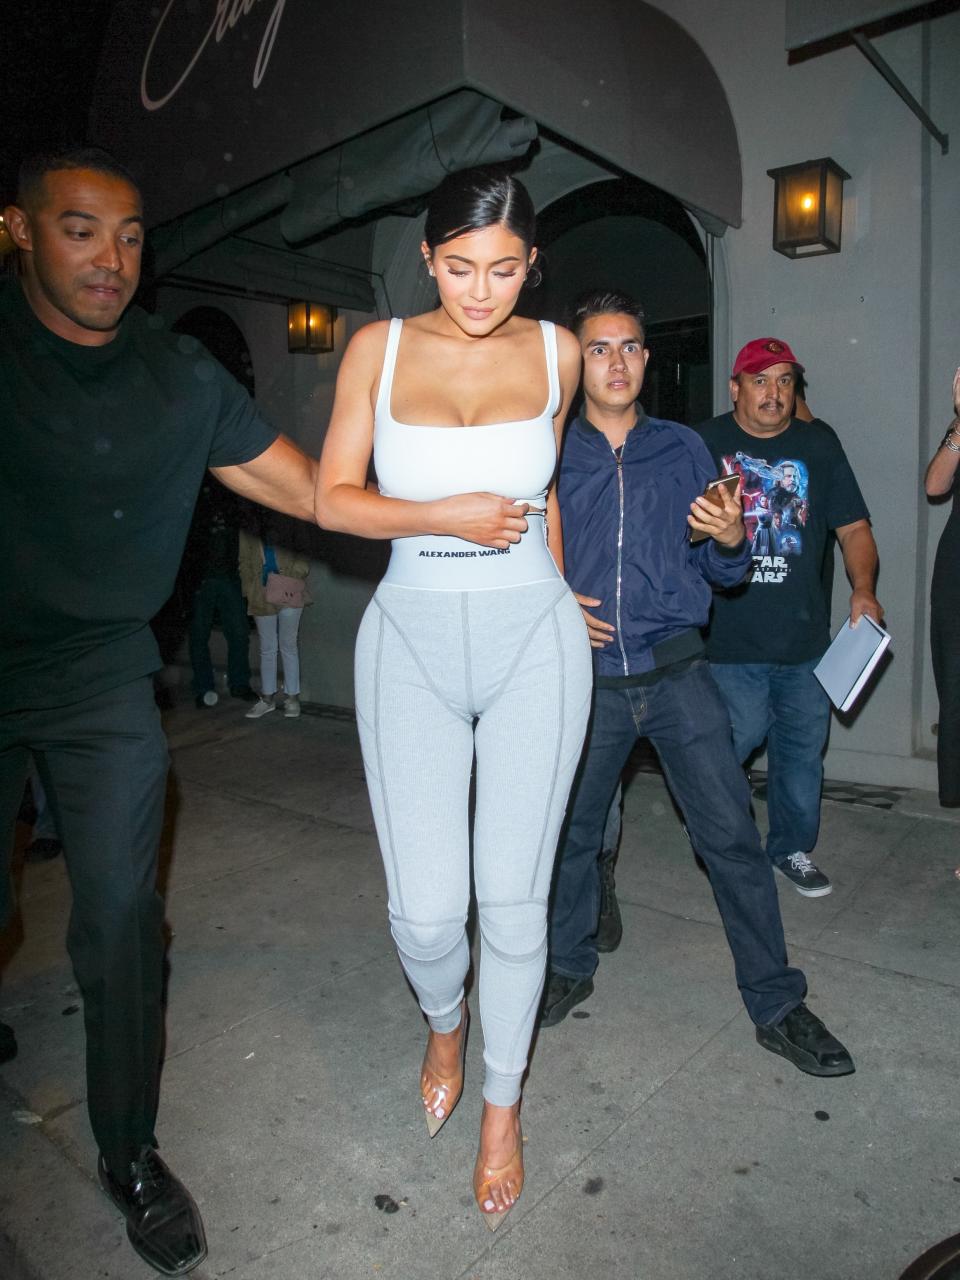 LOS ANGELES, CA - JUNE 16: Kylie Jenner is seen on June 16, 2018 in Los Angeles, California.  (Photo by BG022/Bauer-Griffin/GC Images)